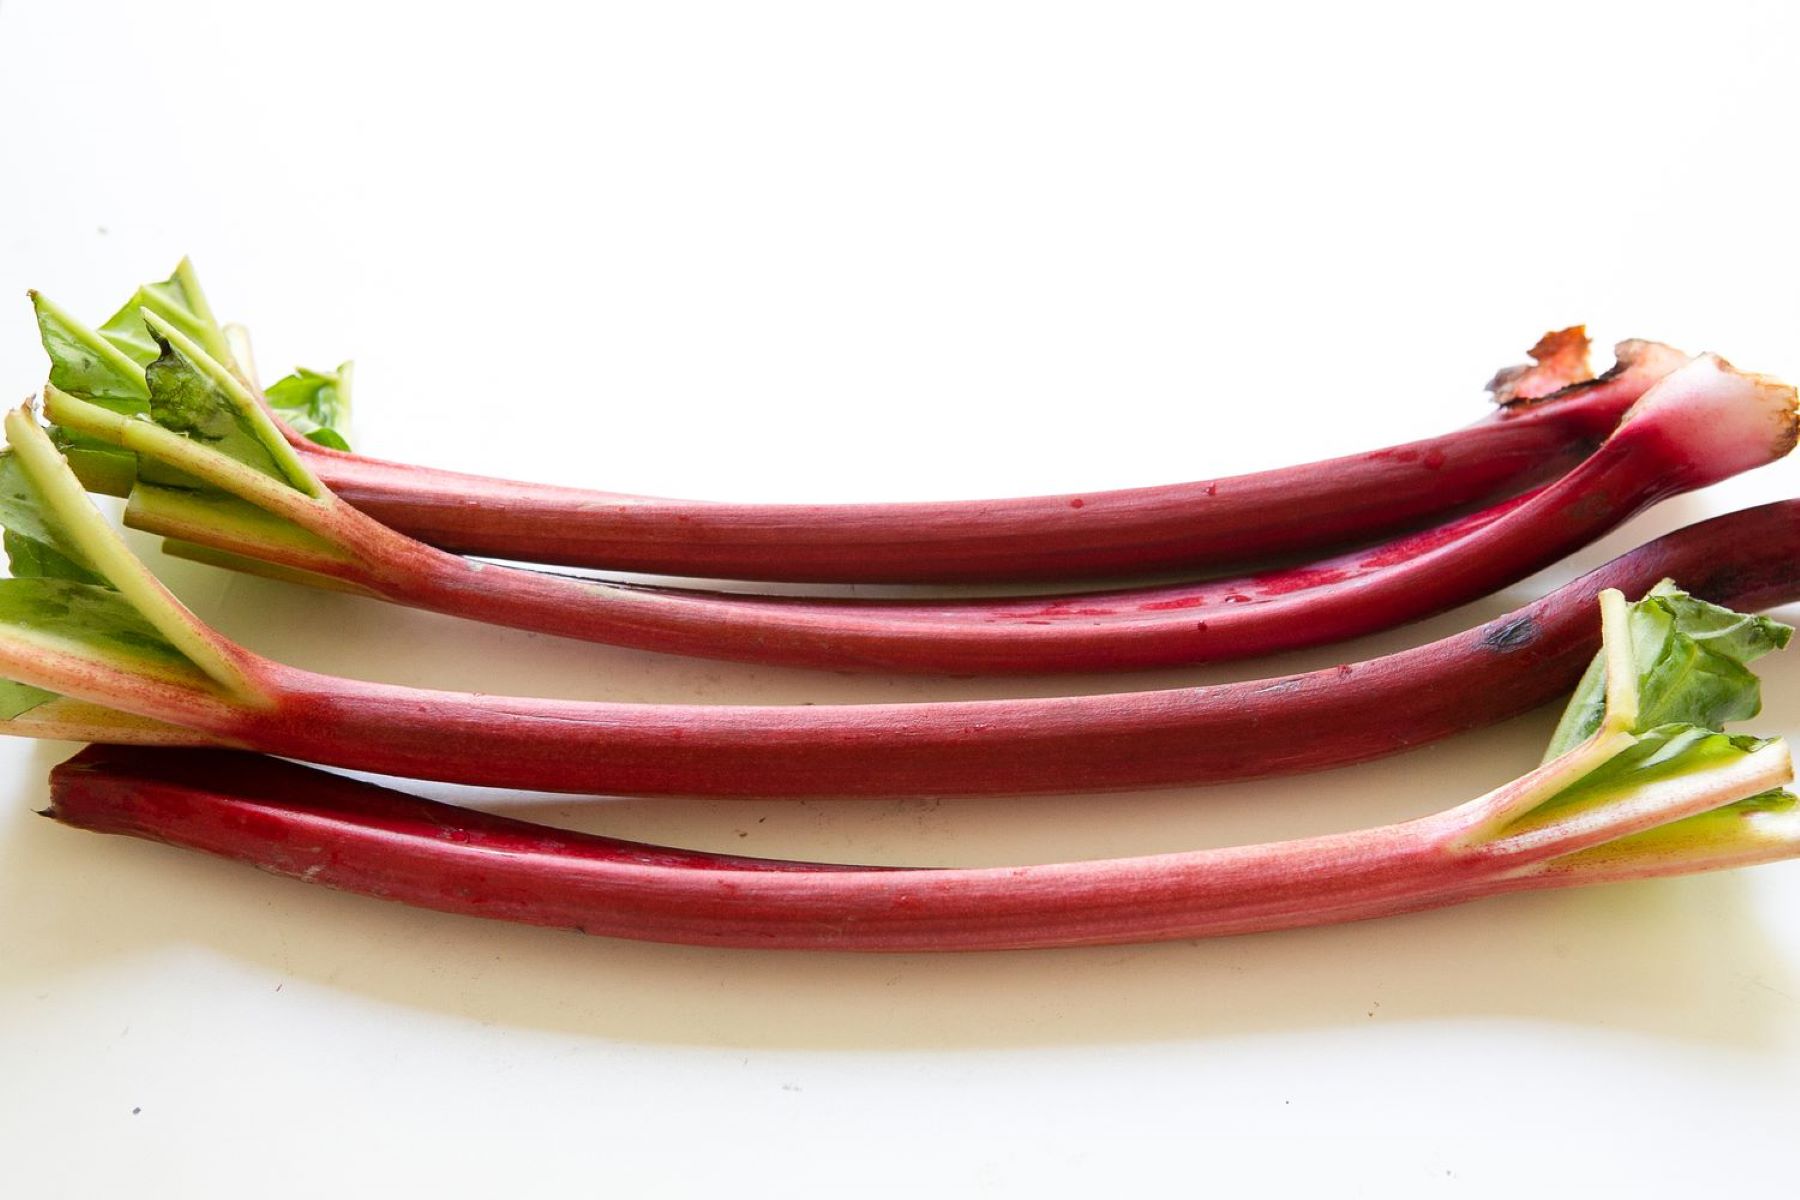 How To Store Rhubarb